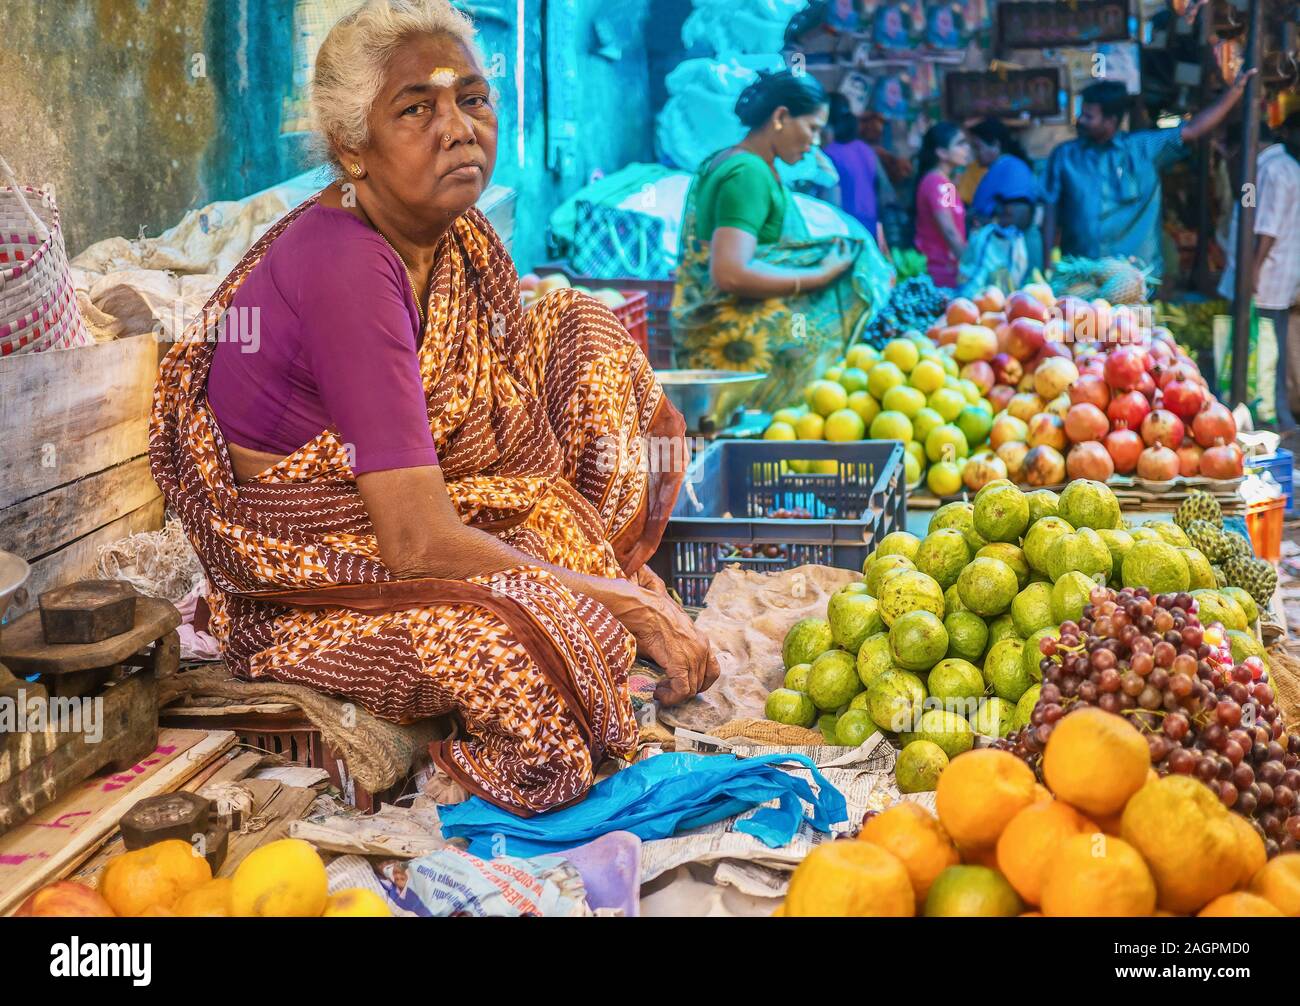 Pondicherry, India - Dec 8, 2013. An Indian woman selling fresh fruit at a market, while sitting cross-legged in a traditional south Indian sari. Stock Photo